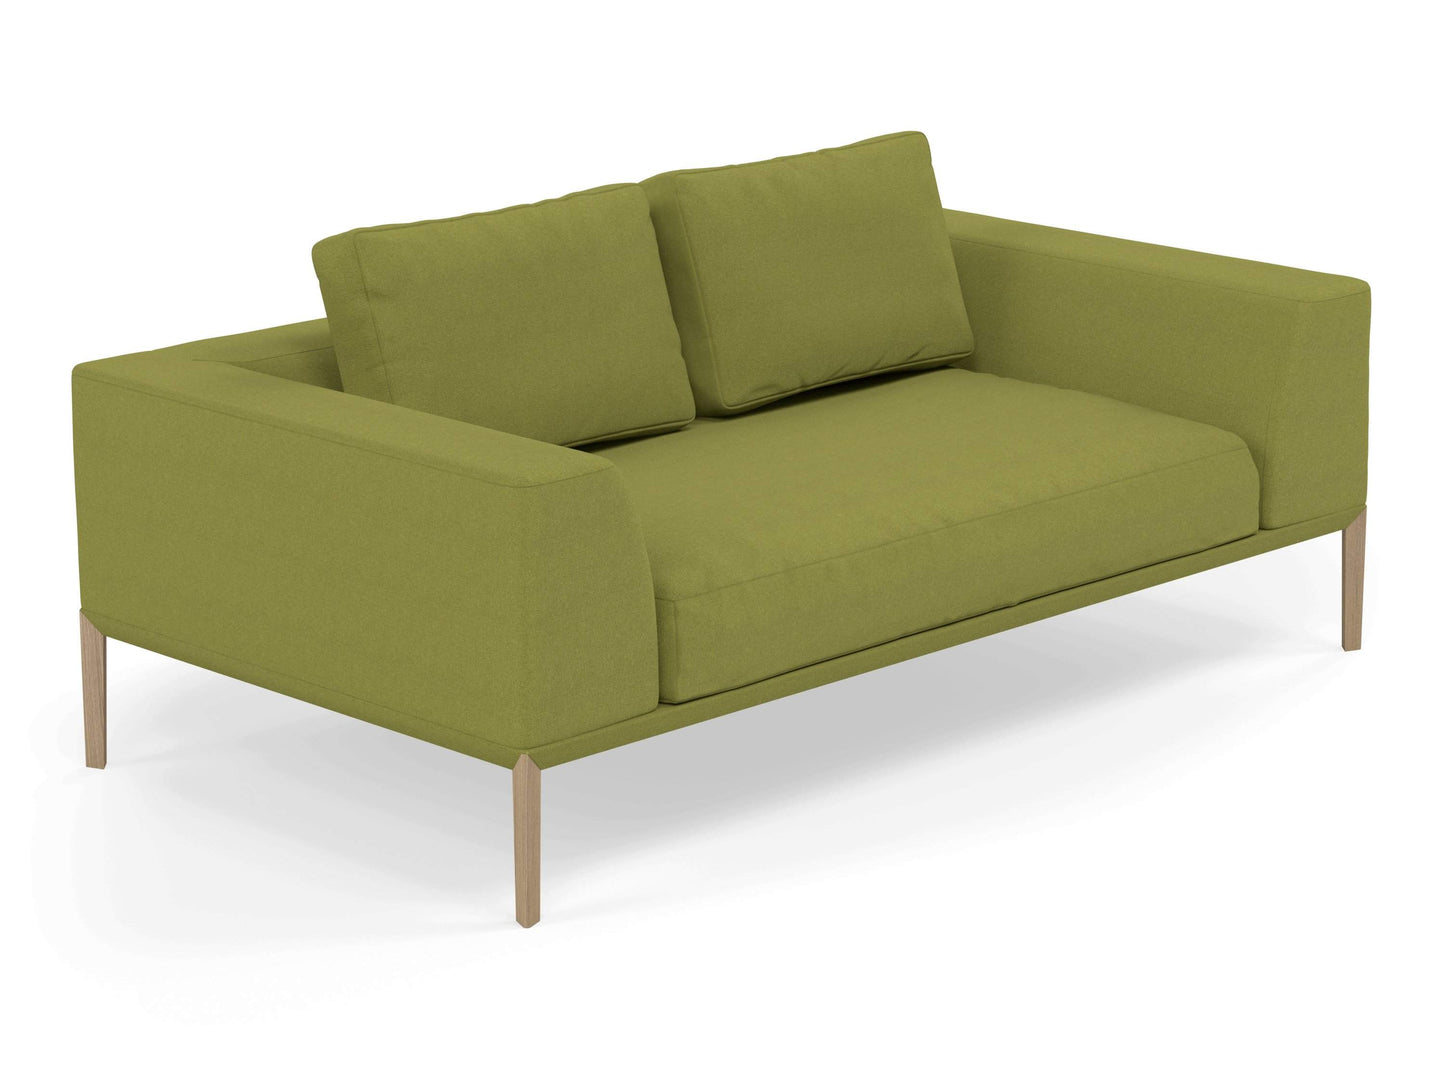 Modern 2 Seater Sofa with 2 Armrests in Lime Green Fabric-Distinct Designs (London) Ltd